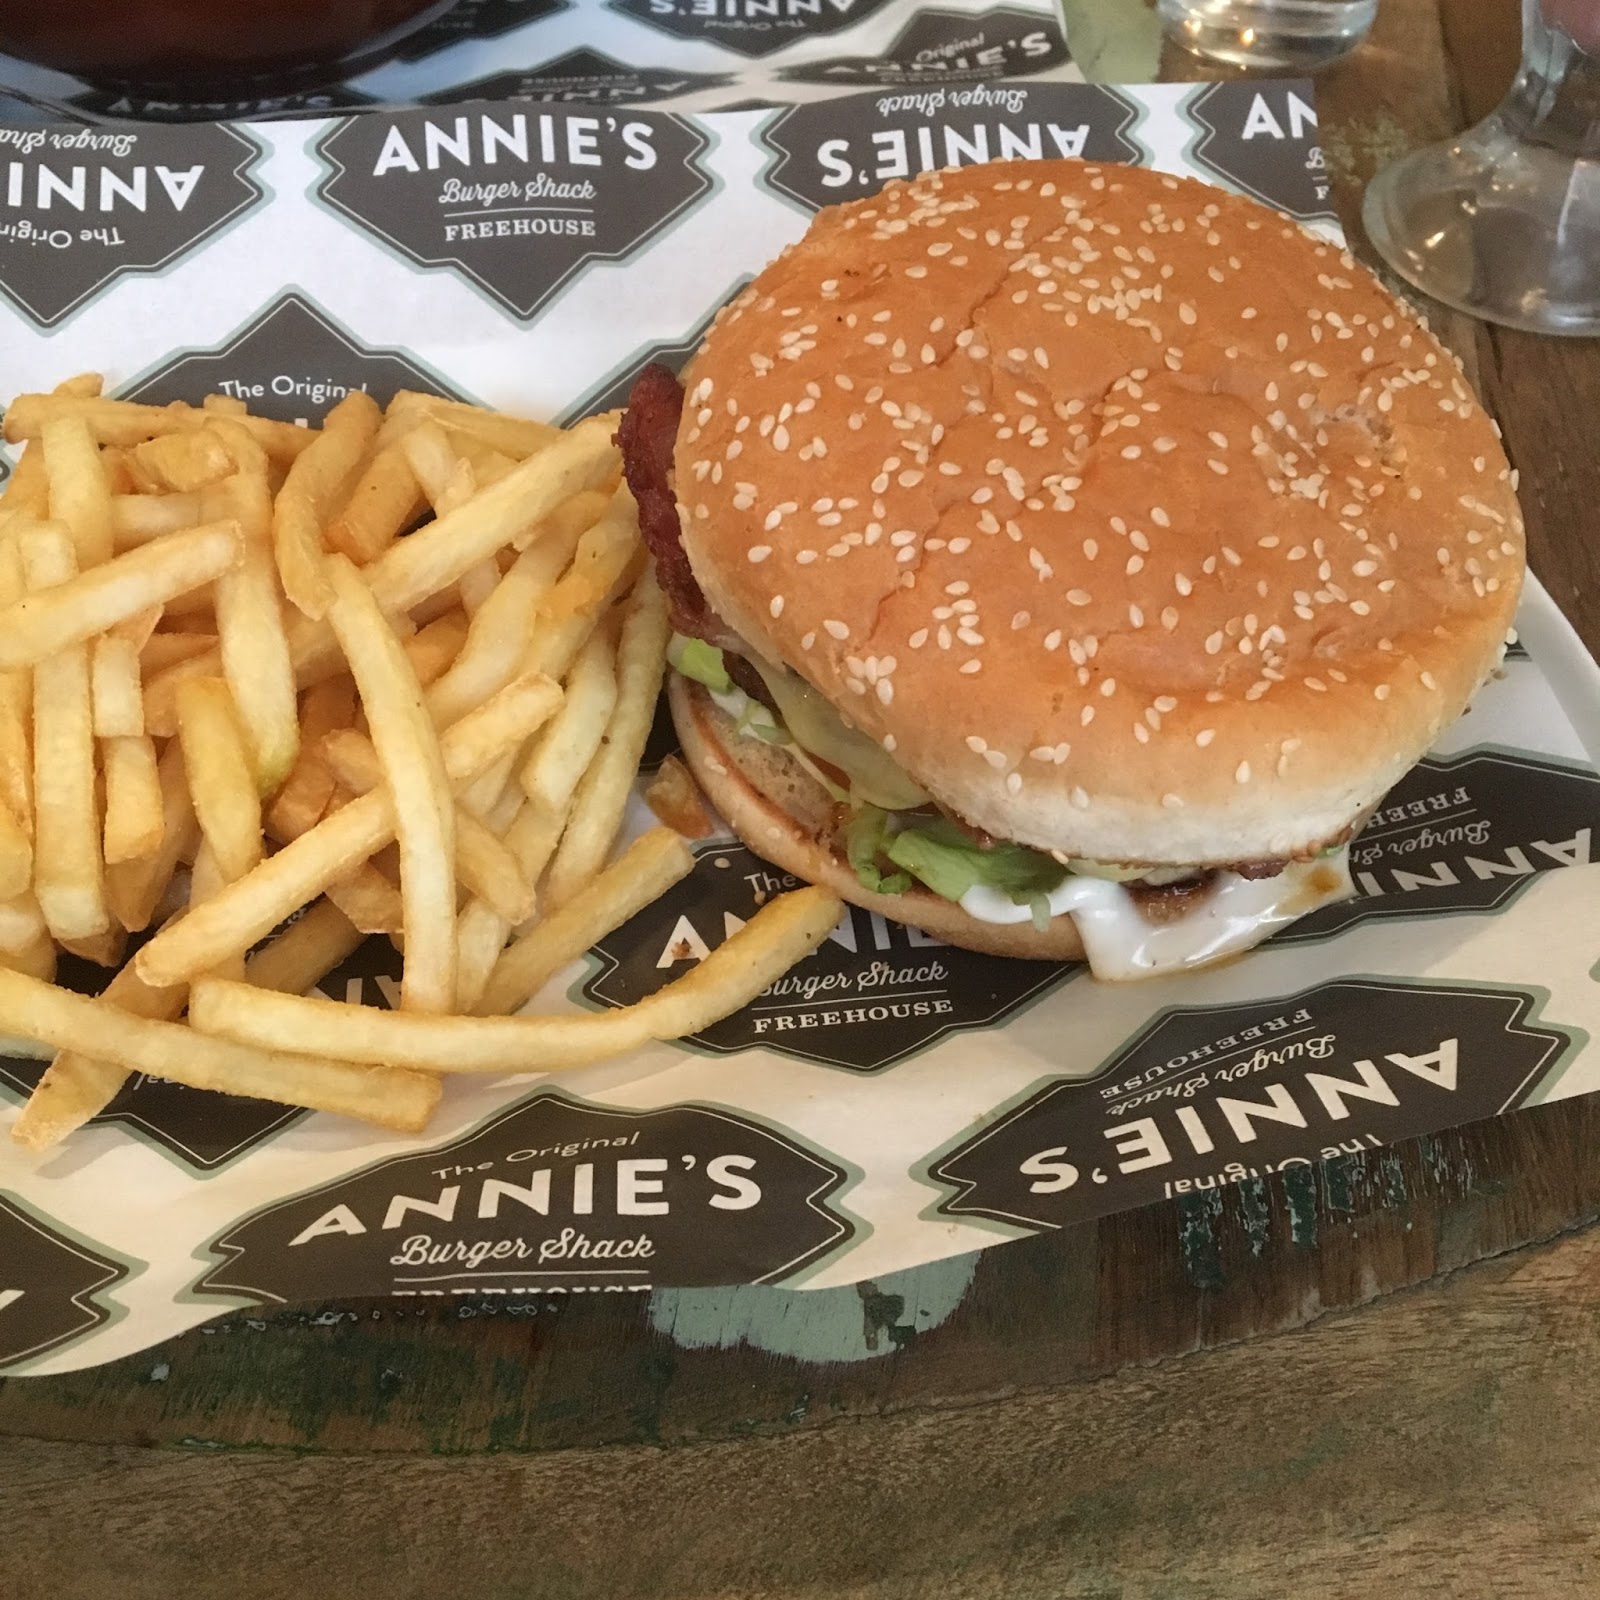 Annie's Burger Shack Nottingham burger and chips